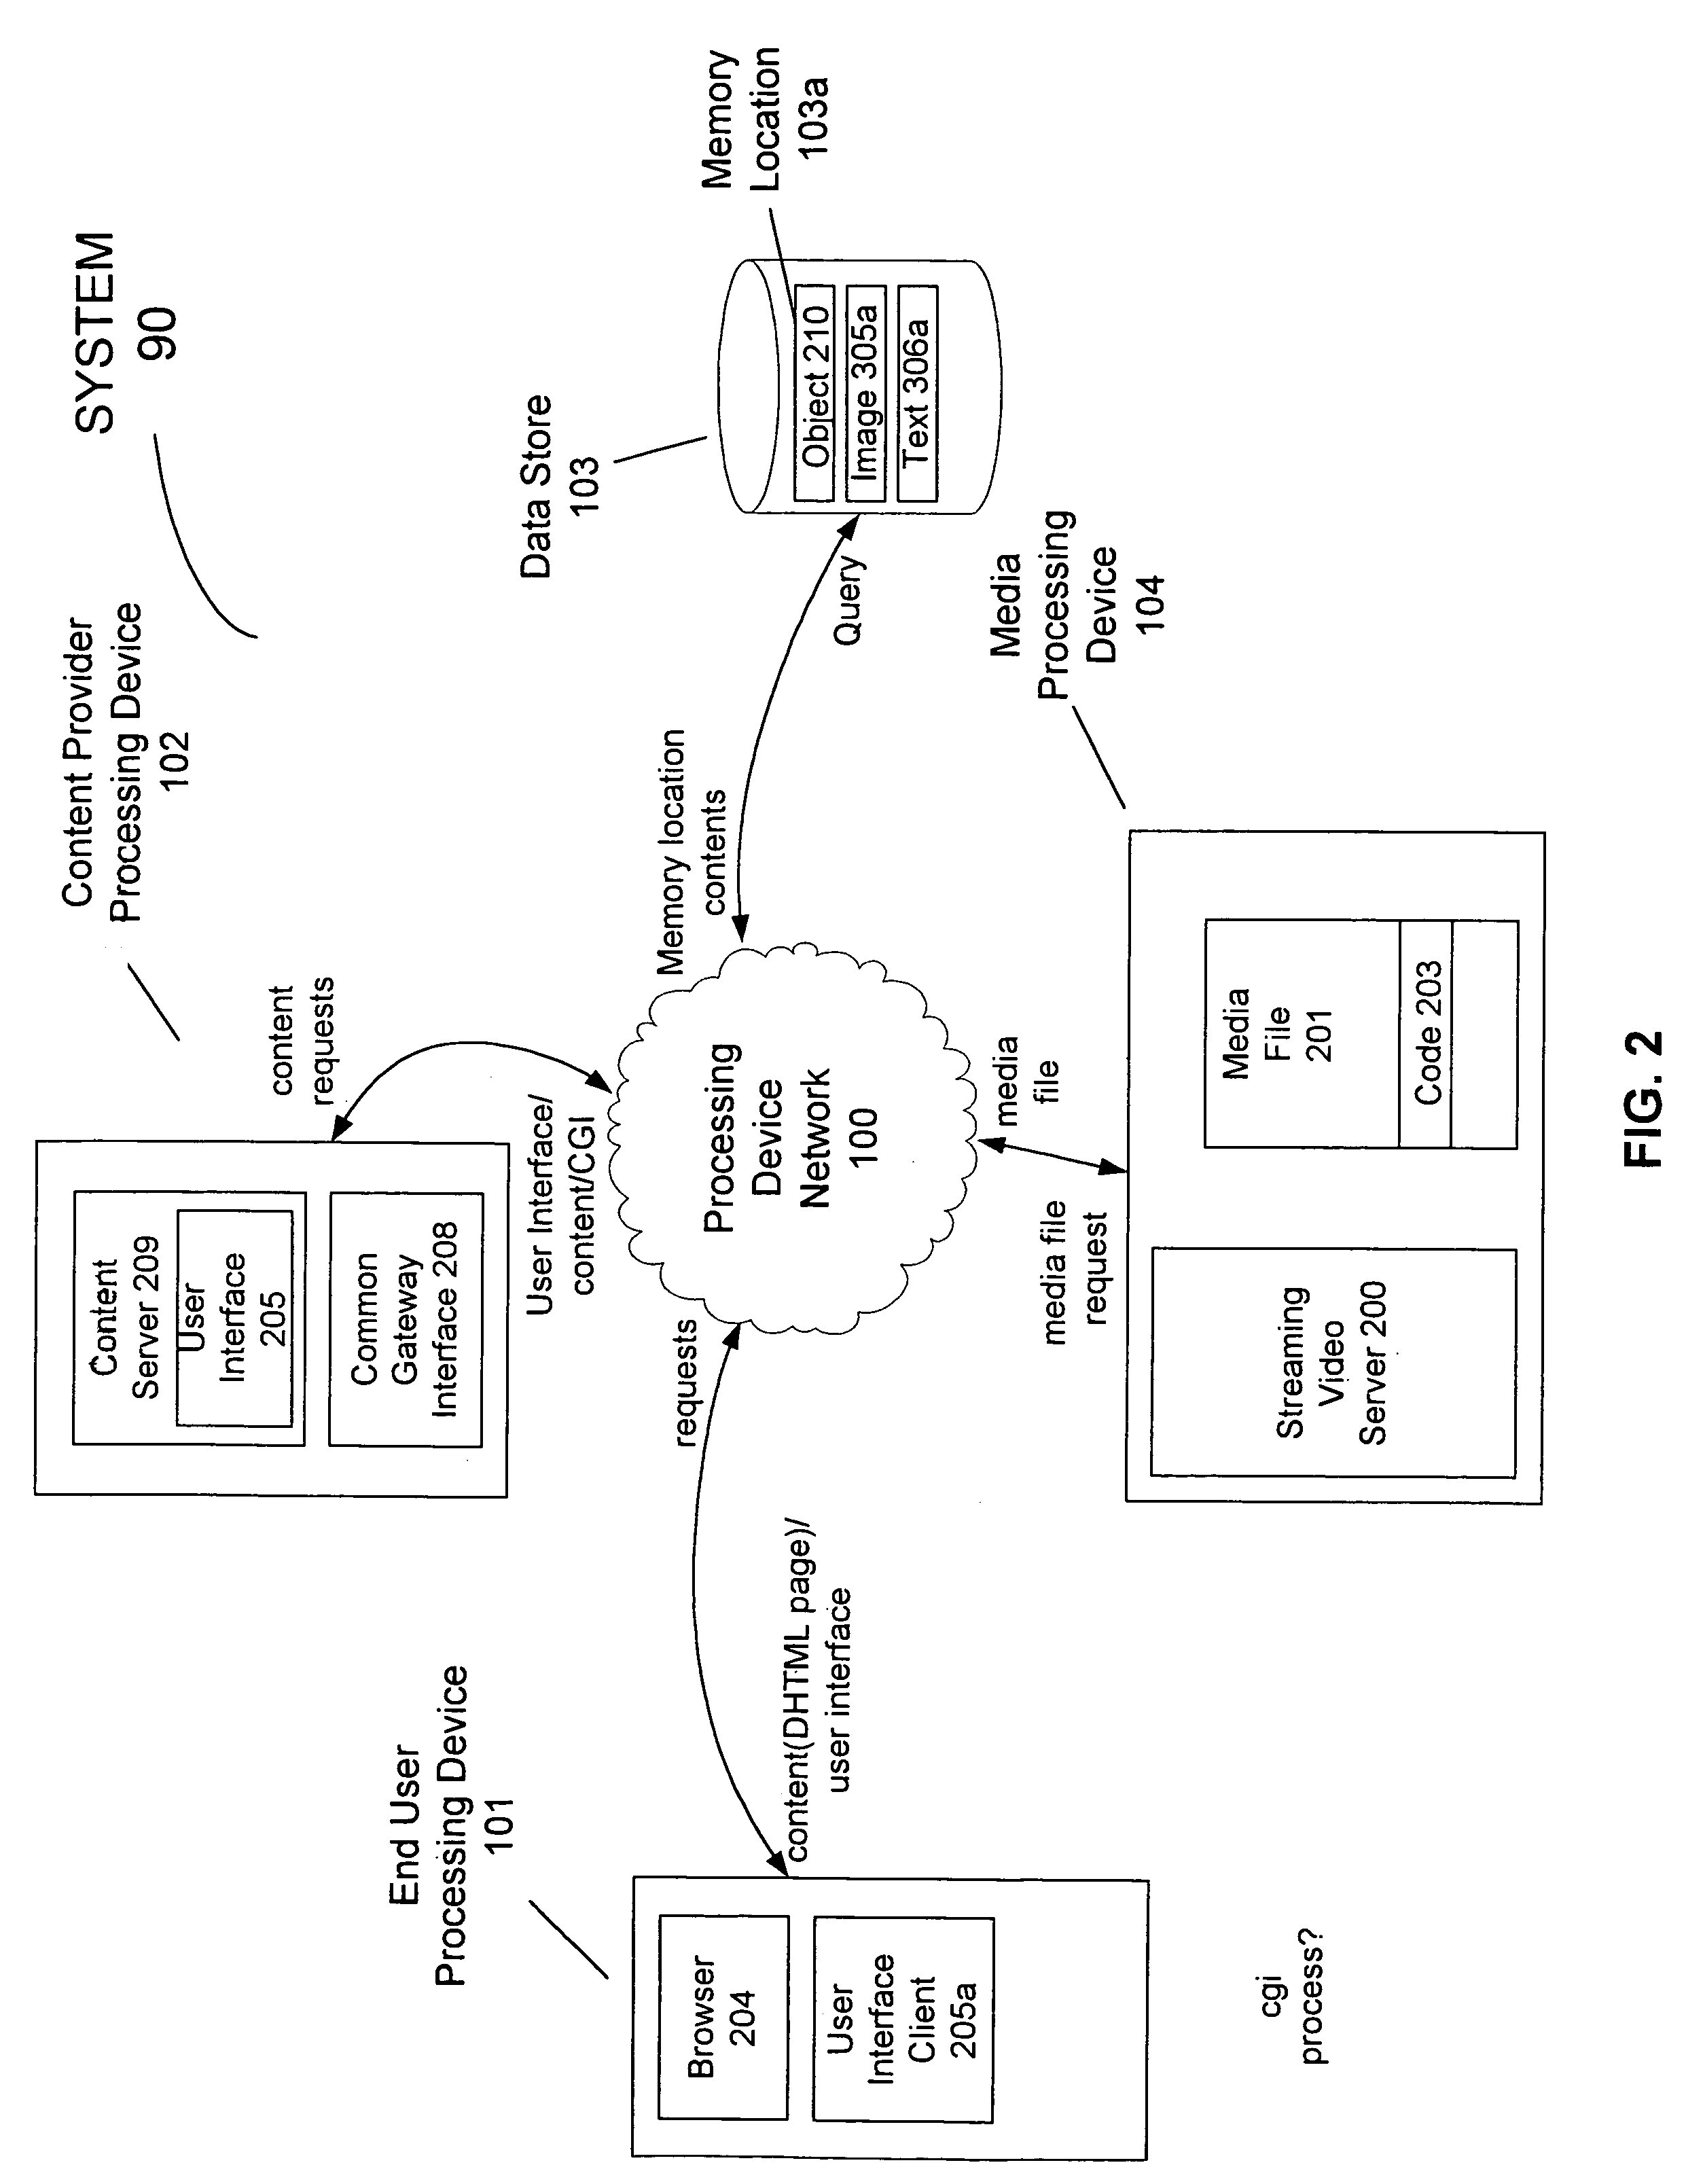 Method, system, and article of manufacture for integrating streaming content and a real time interactive dynamic user interface over a network